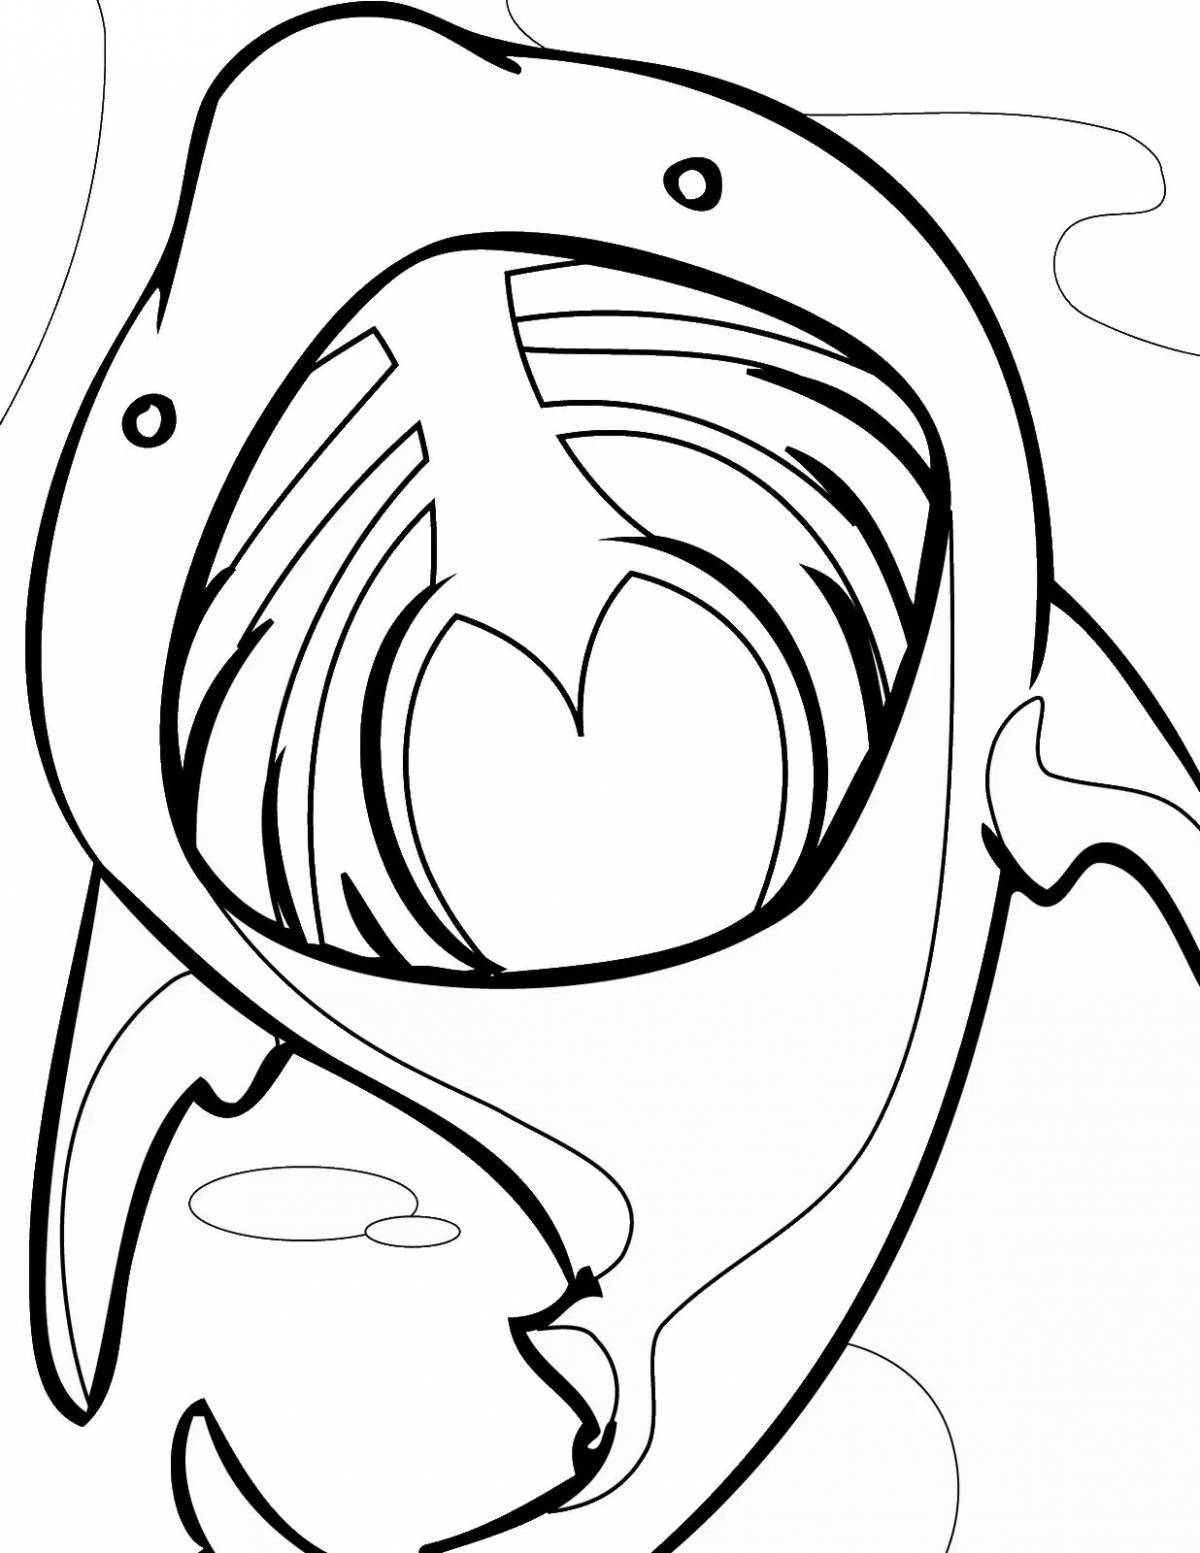 Big whale shark coloring page